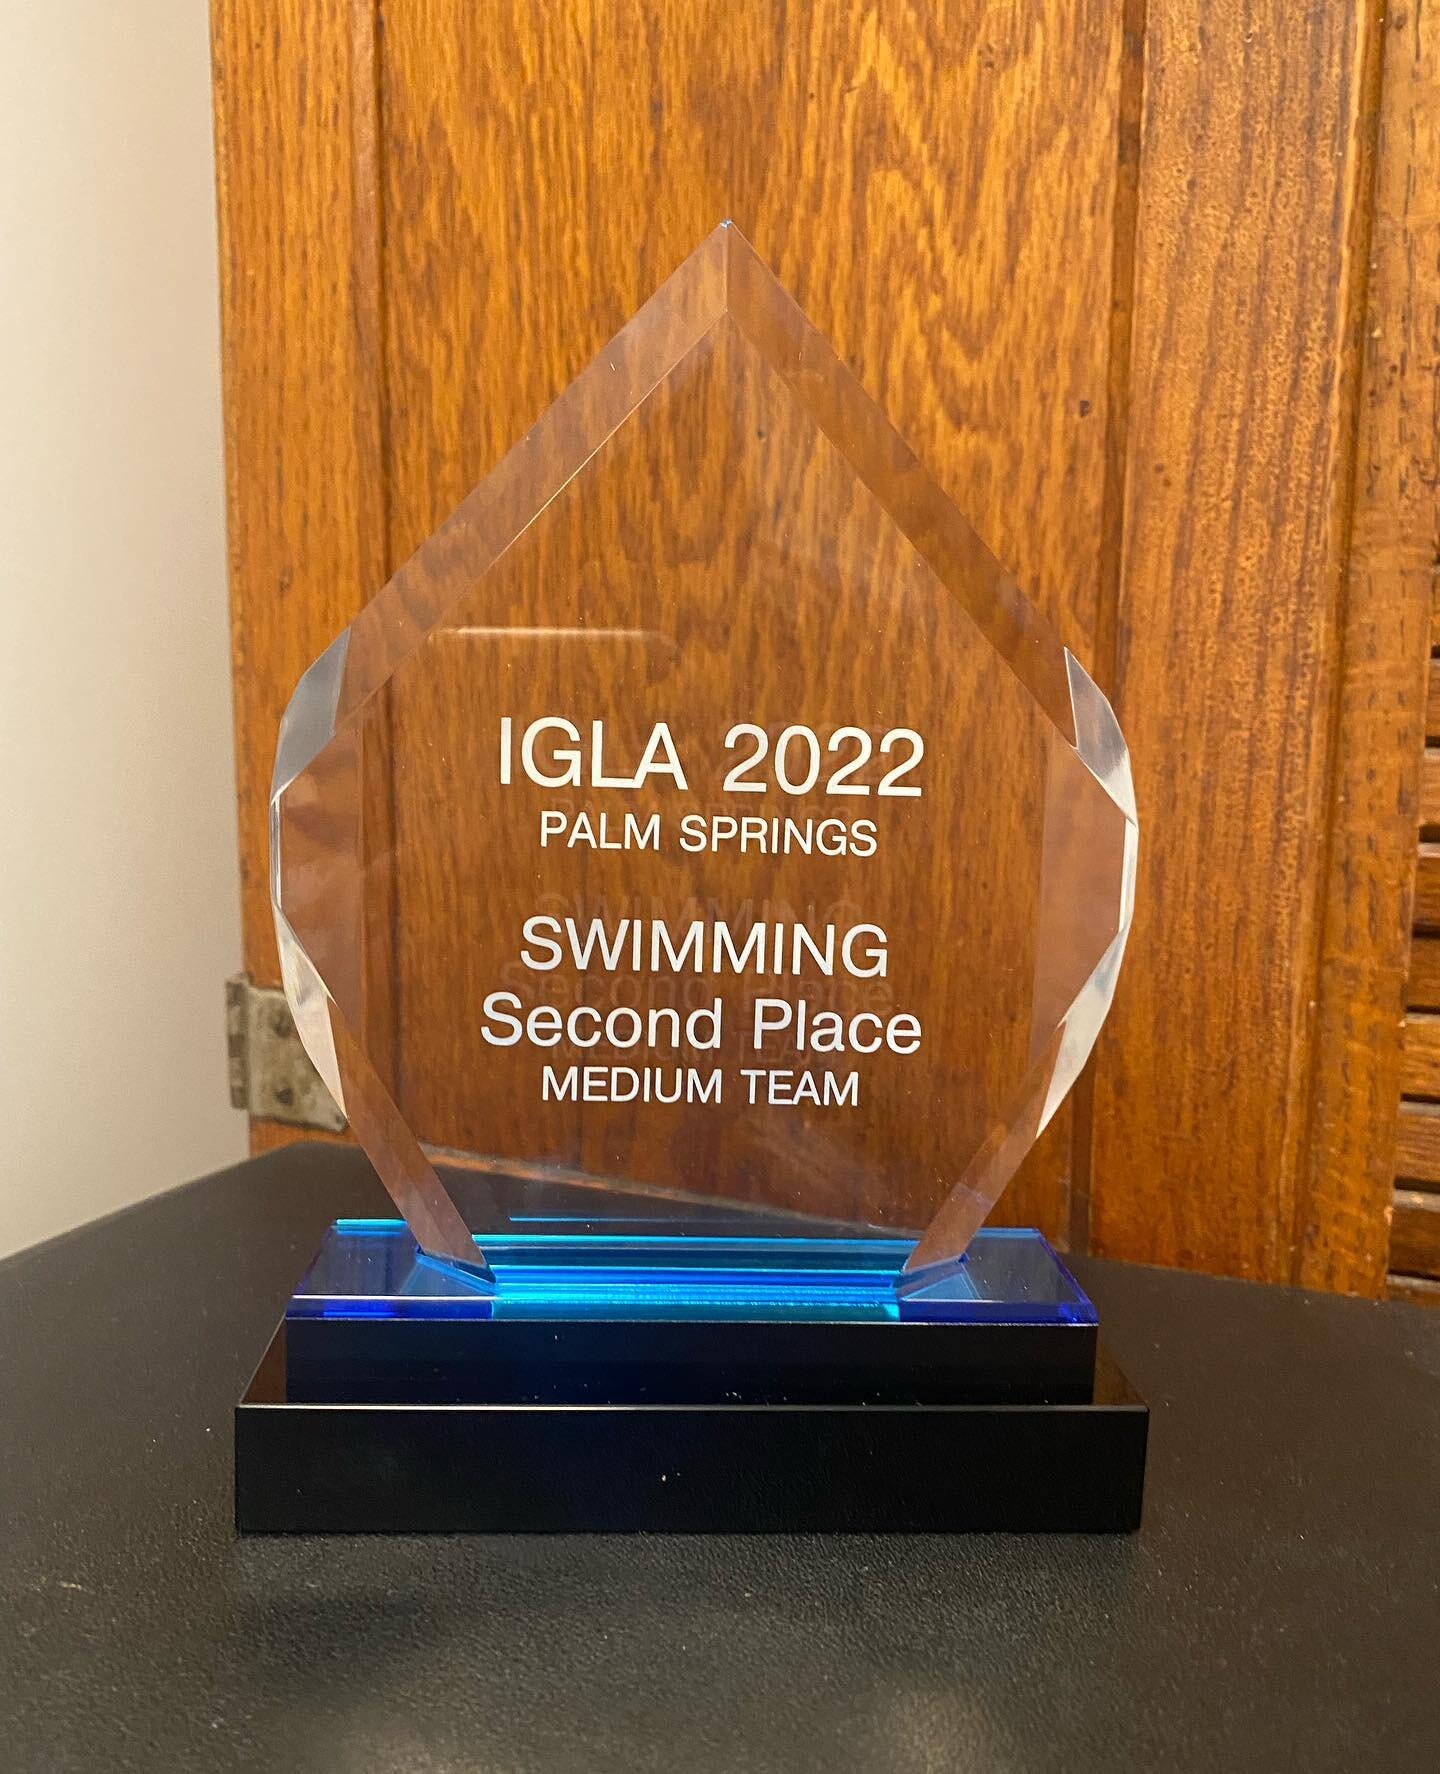 Lookie what just came in the mail?! Super proud of this team and our second place finish in the medium team division at @igla_2022!!! Maybe someday, we&rsquo;ll take it all! Thanks again for hosting a wonderful meet, @longbeachgrunions and @wh2omaste